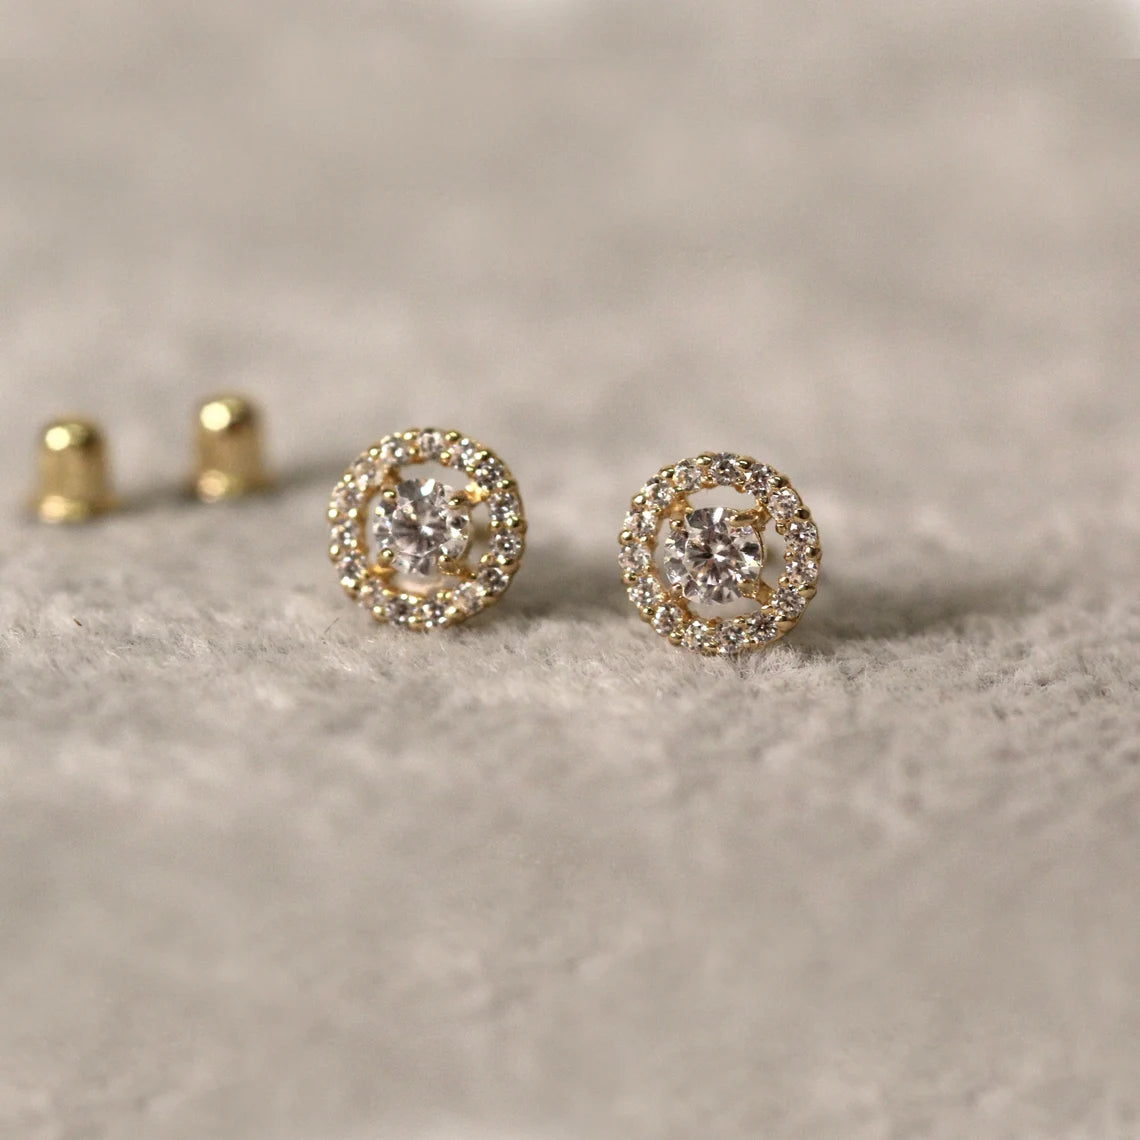 14k Yellow Gold Earrings with Cubic Zirconia.